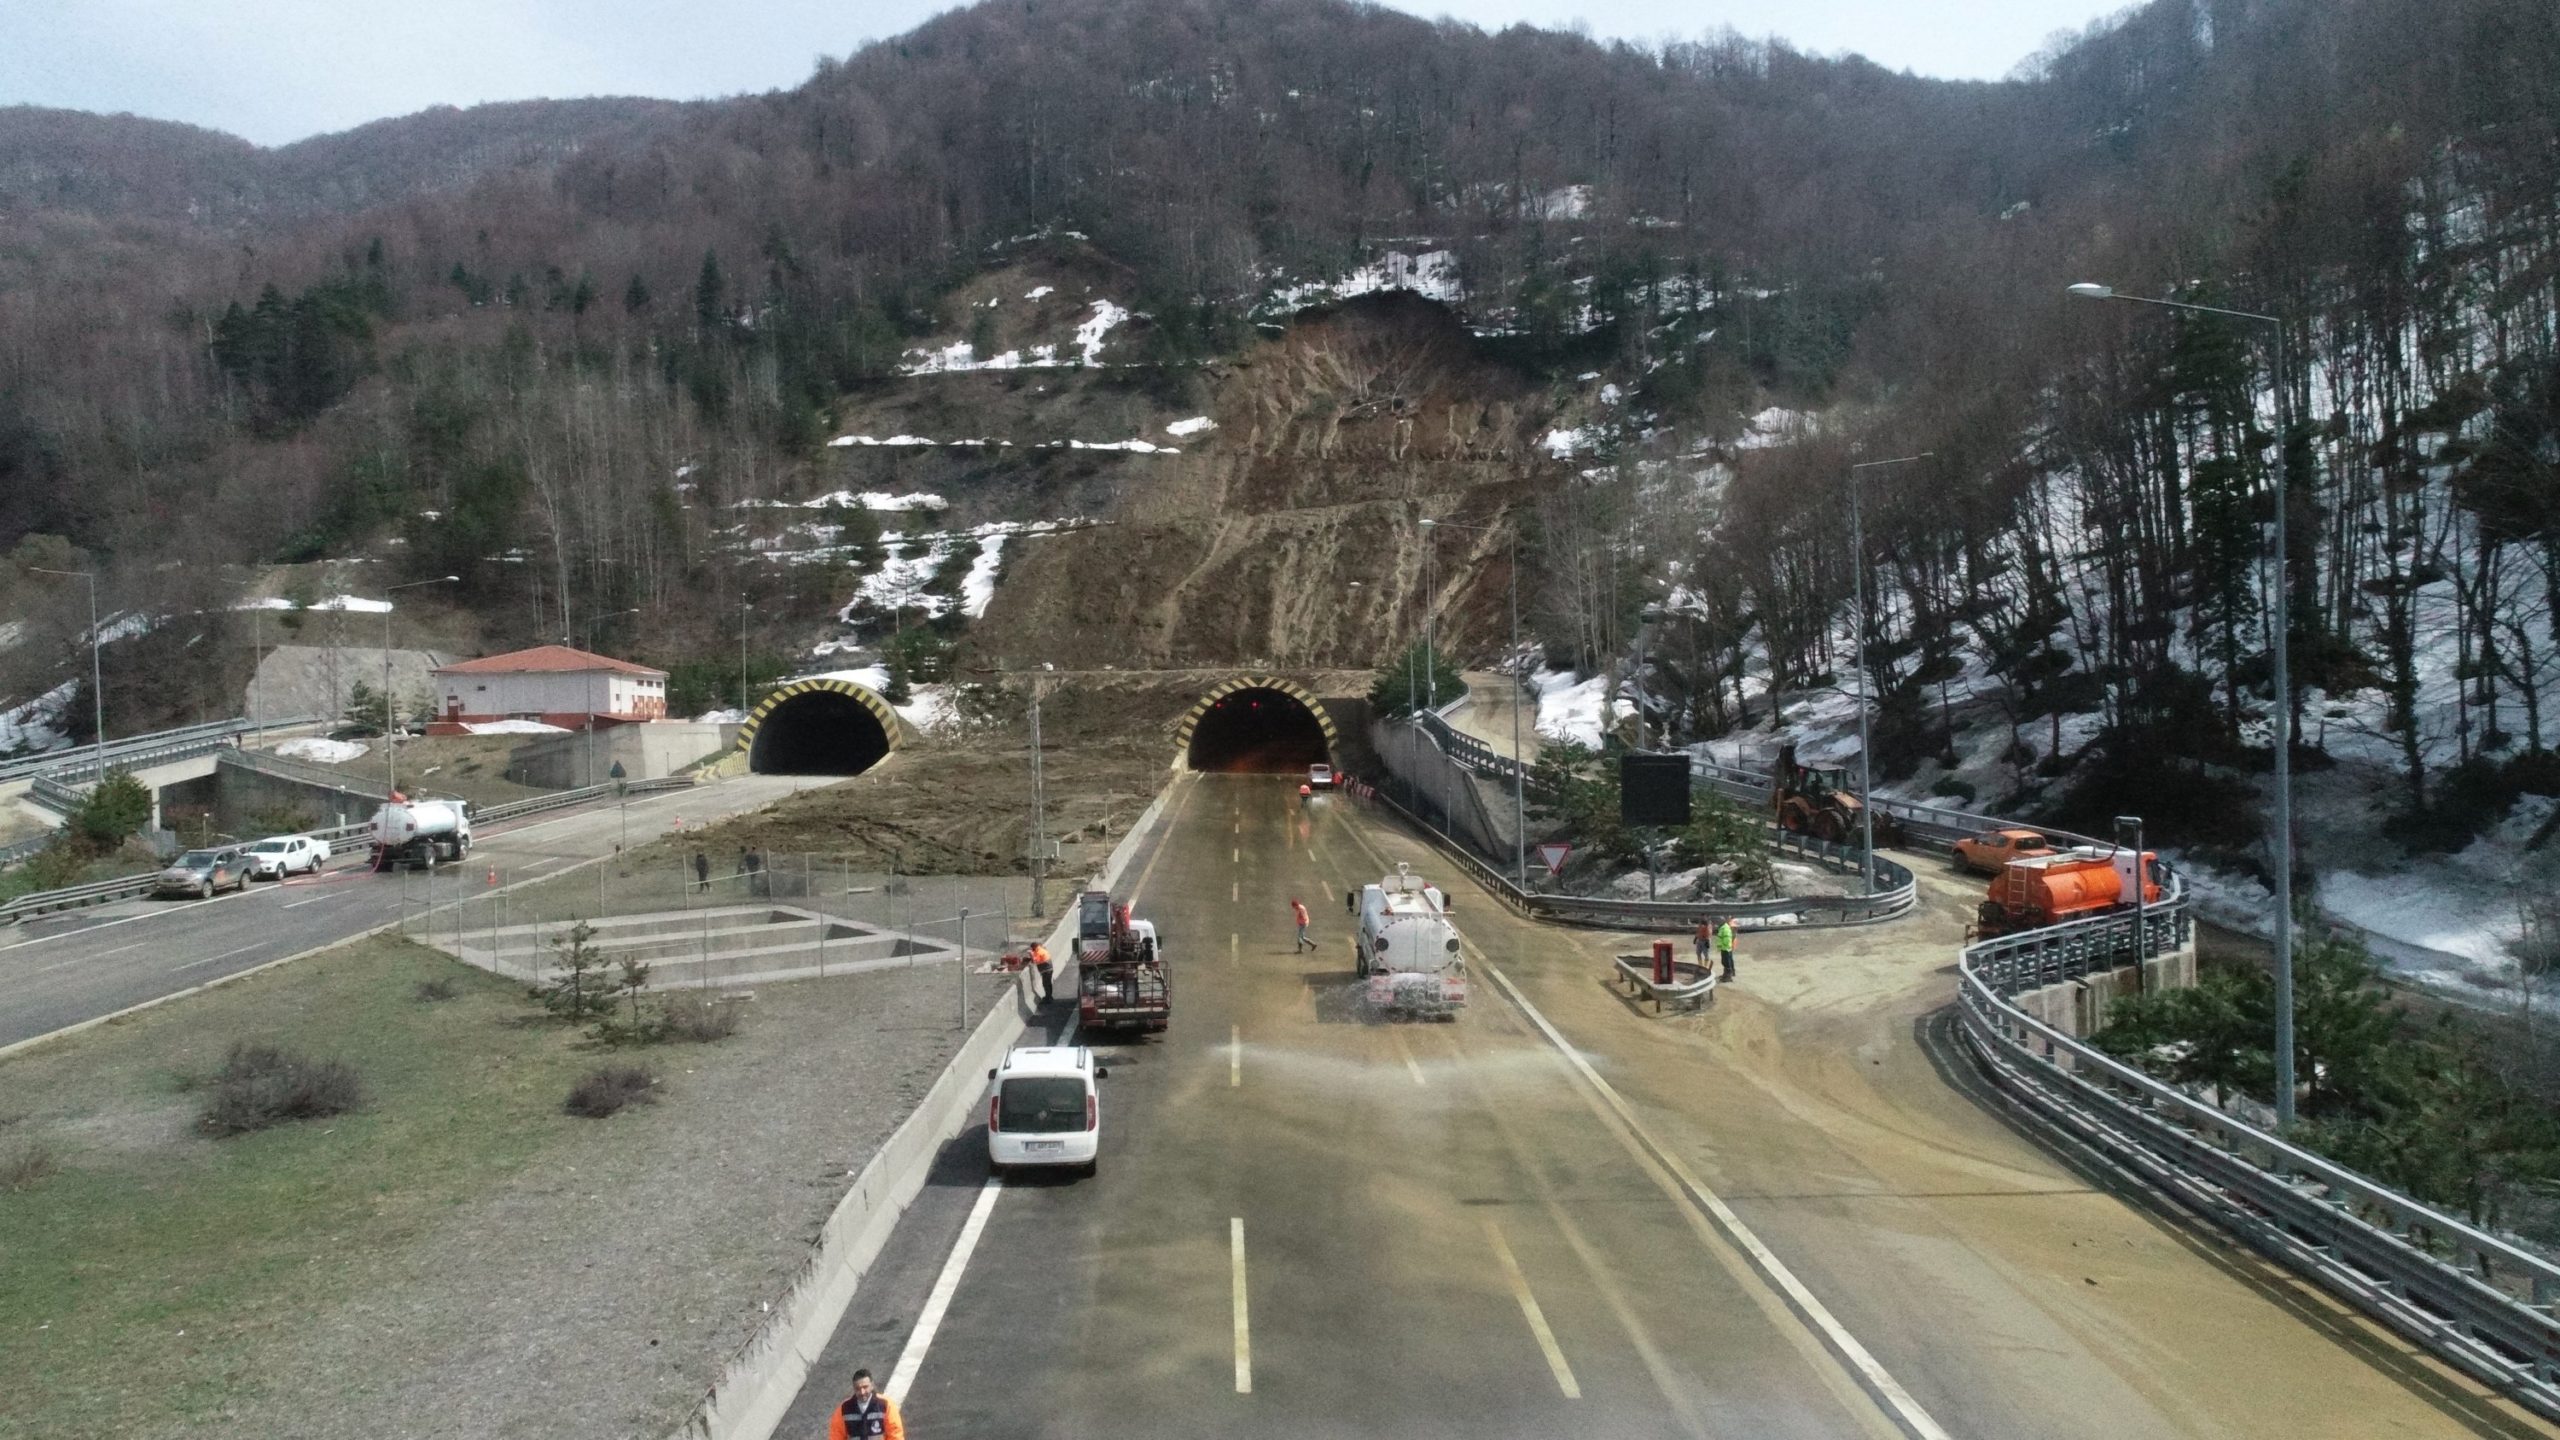 The aftermath of the landslide at Mount Bolu in Turkey. 